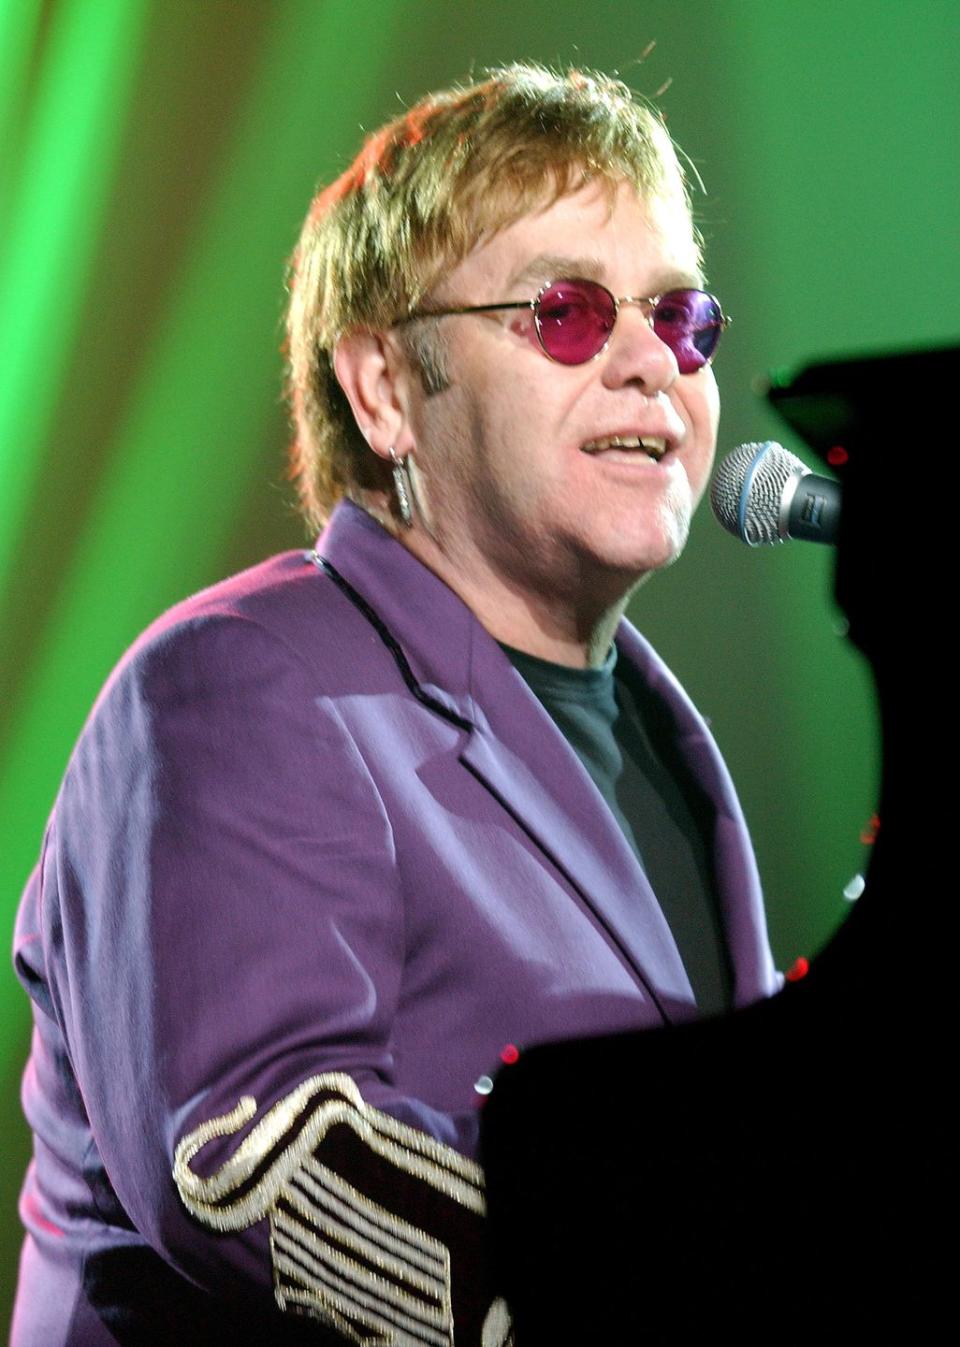 50 Years of Elton John's Fabulously Over-the-Top Sunglasses